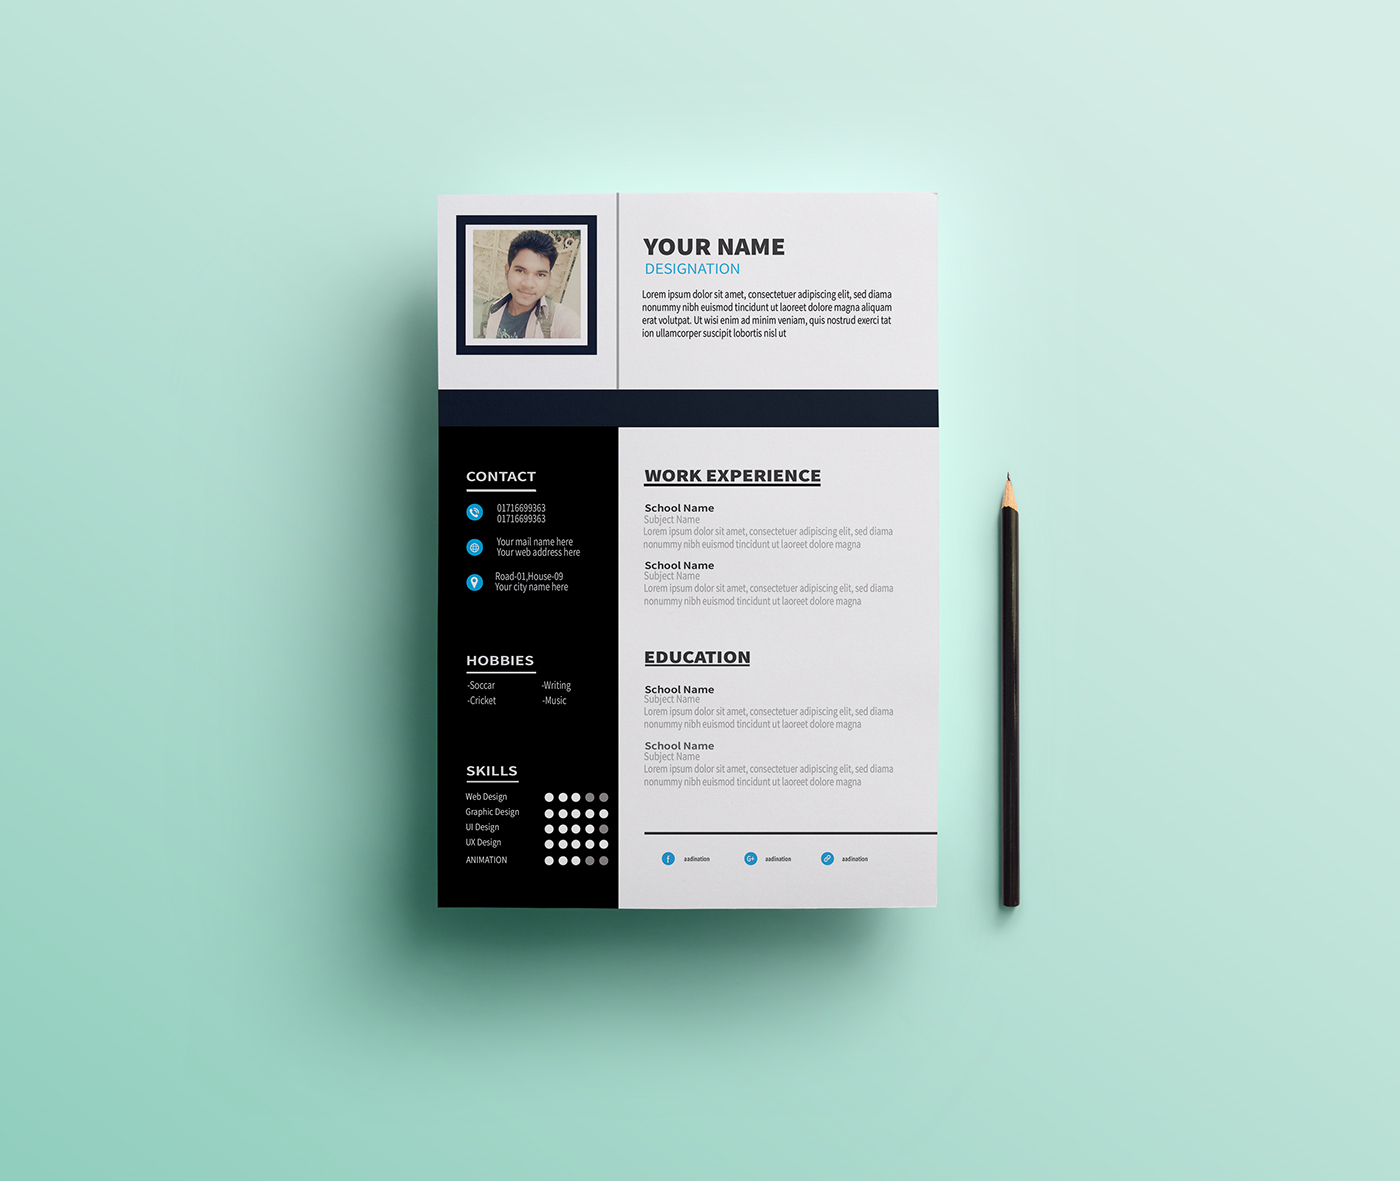 free flyer template free resume template Free CV Template free cv Free Resume new resume new cv 2018